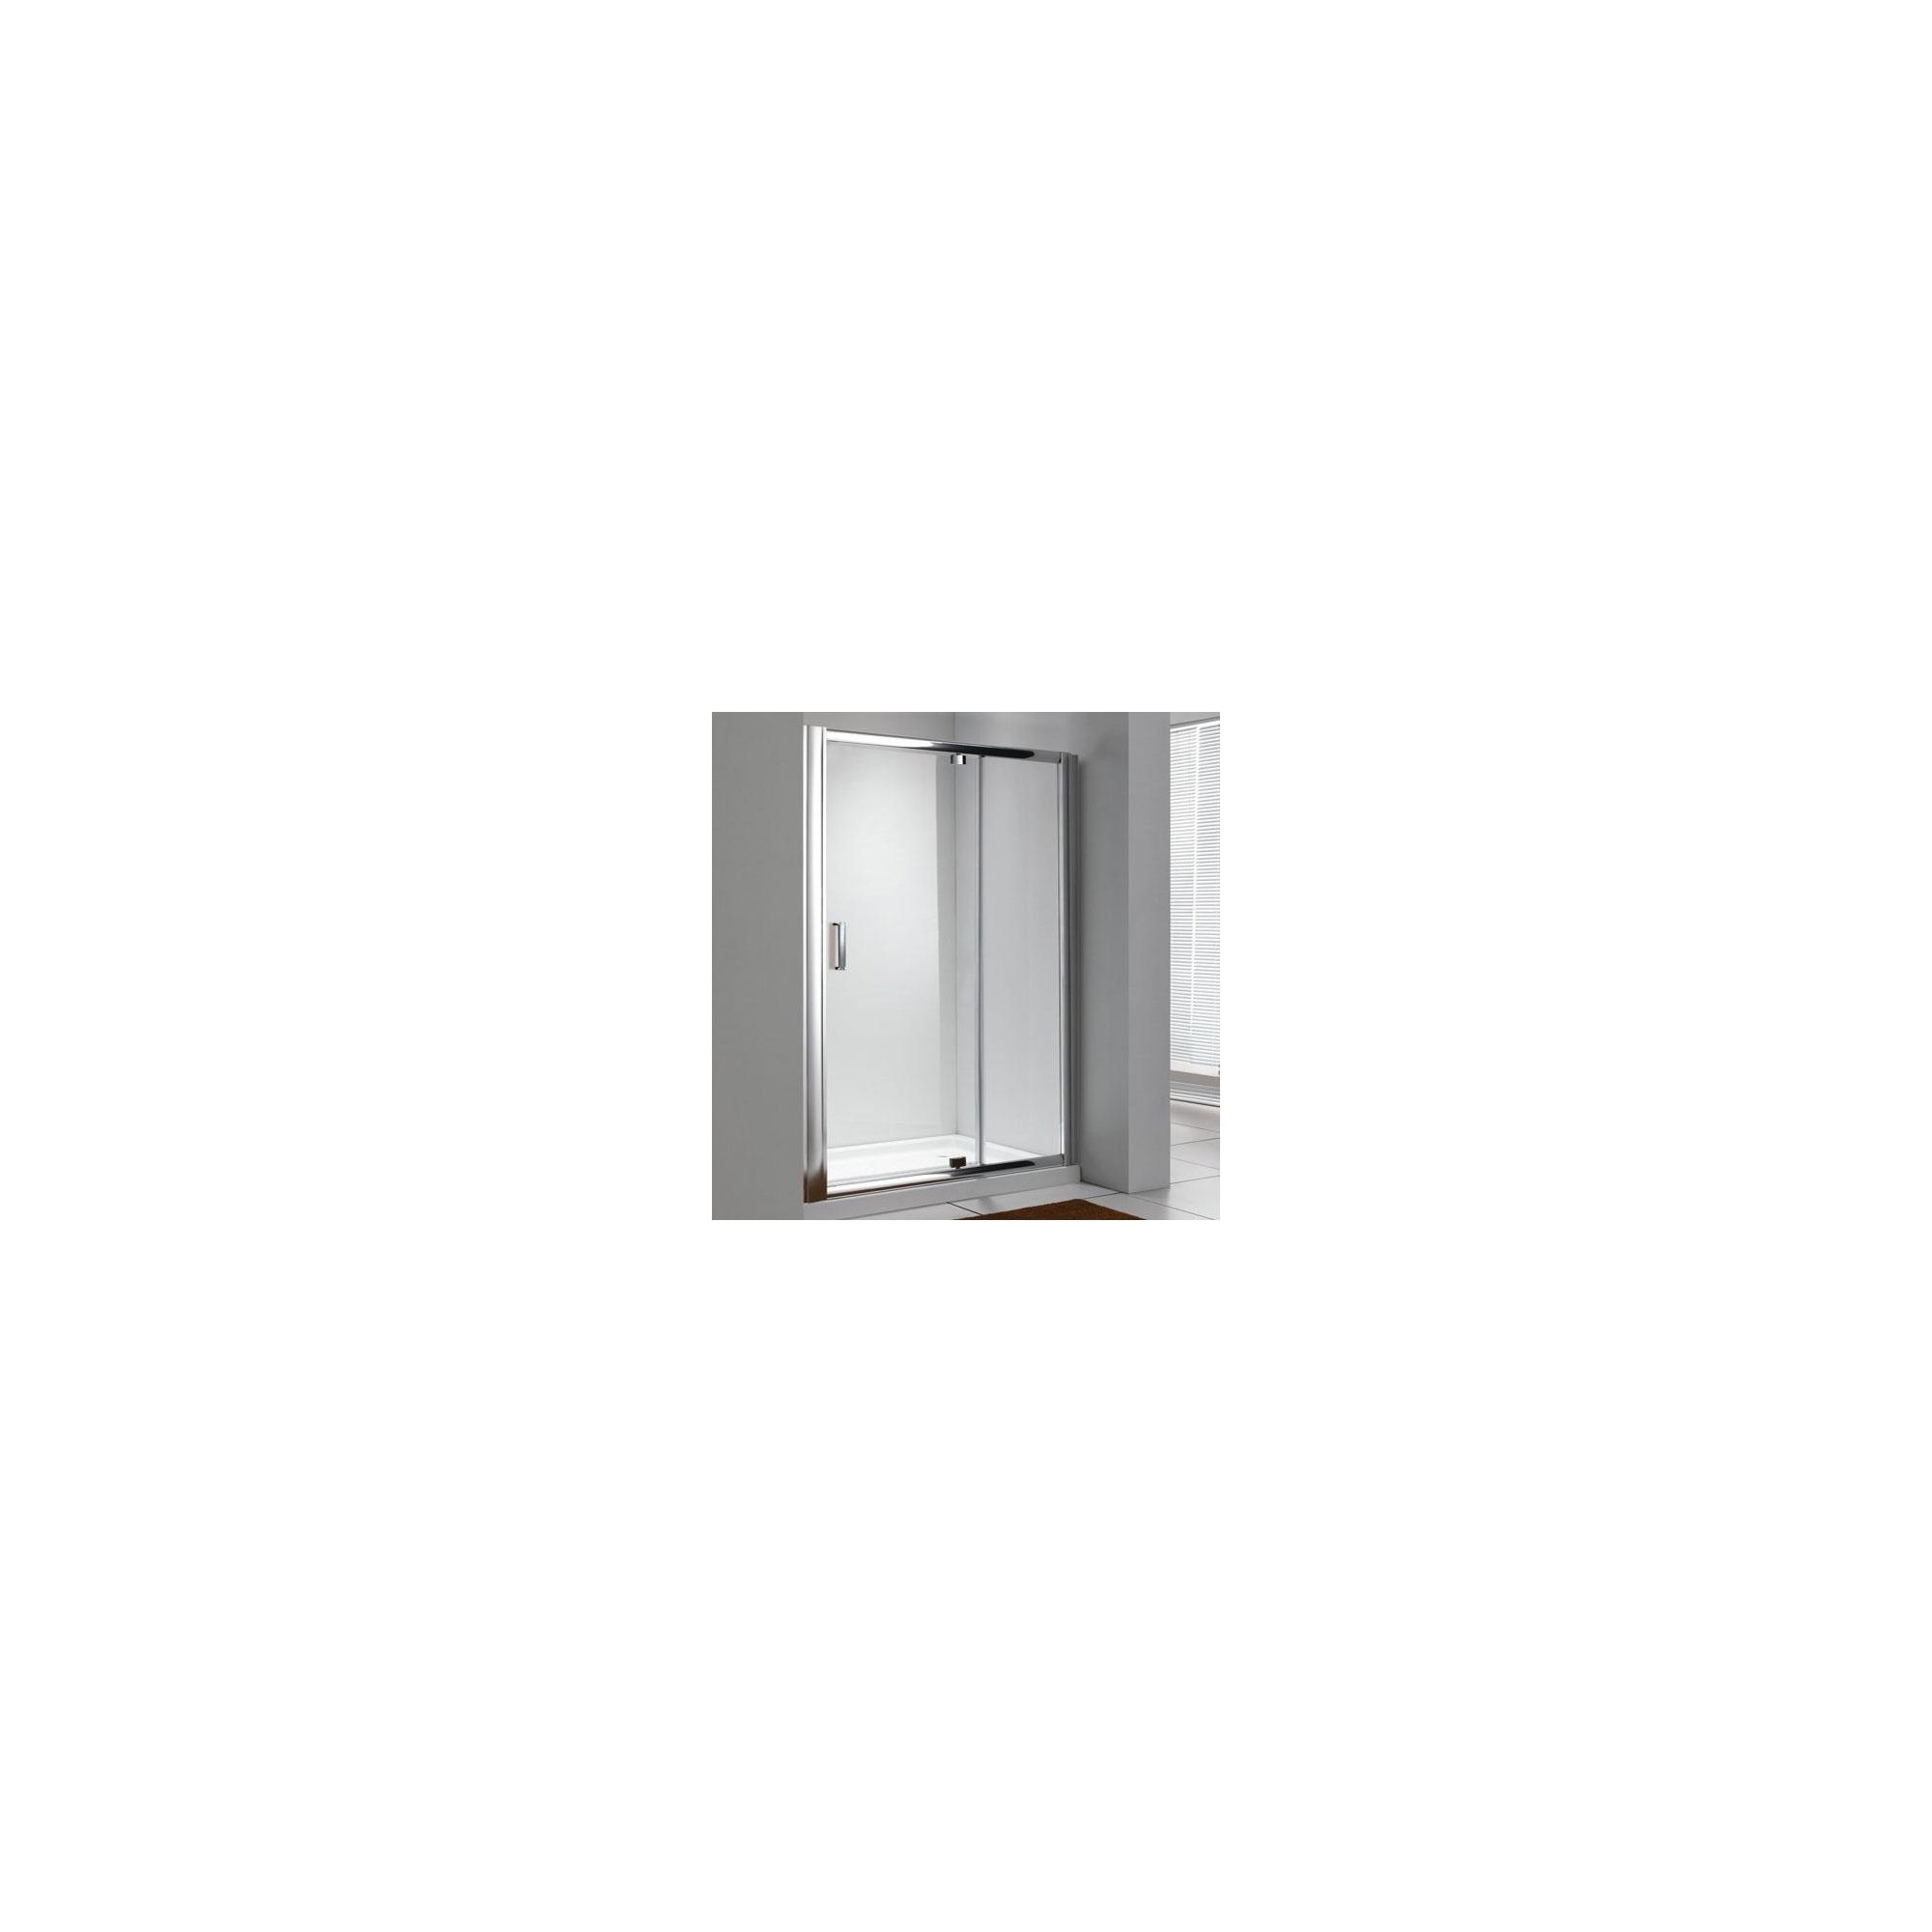 Duchy Style Pivot Door Shower Enclosure, 800mm x 700mm, 6mm Glass, Low Profile Tray at Tesco Direct